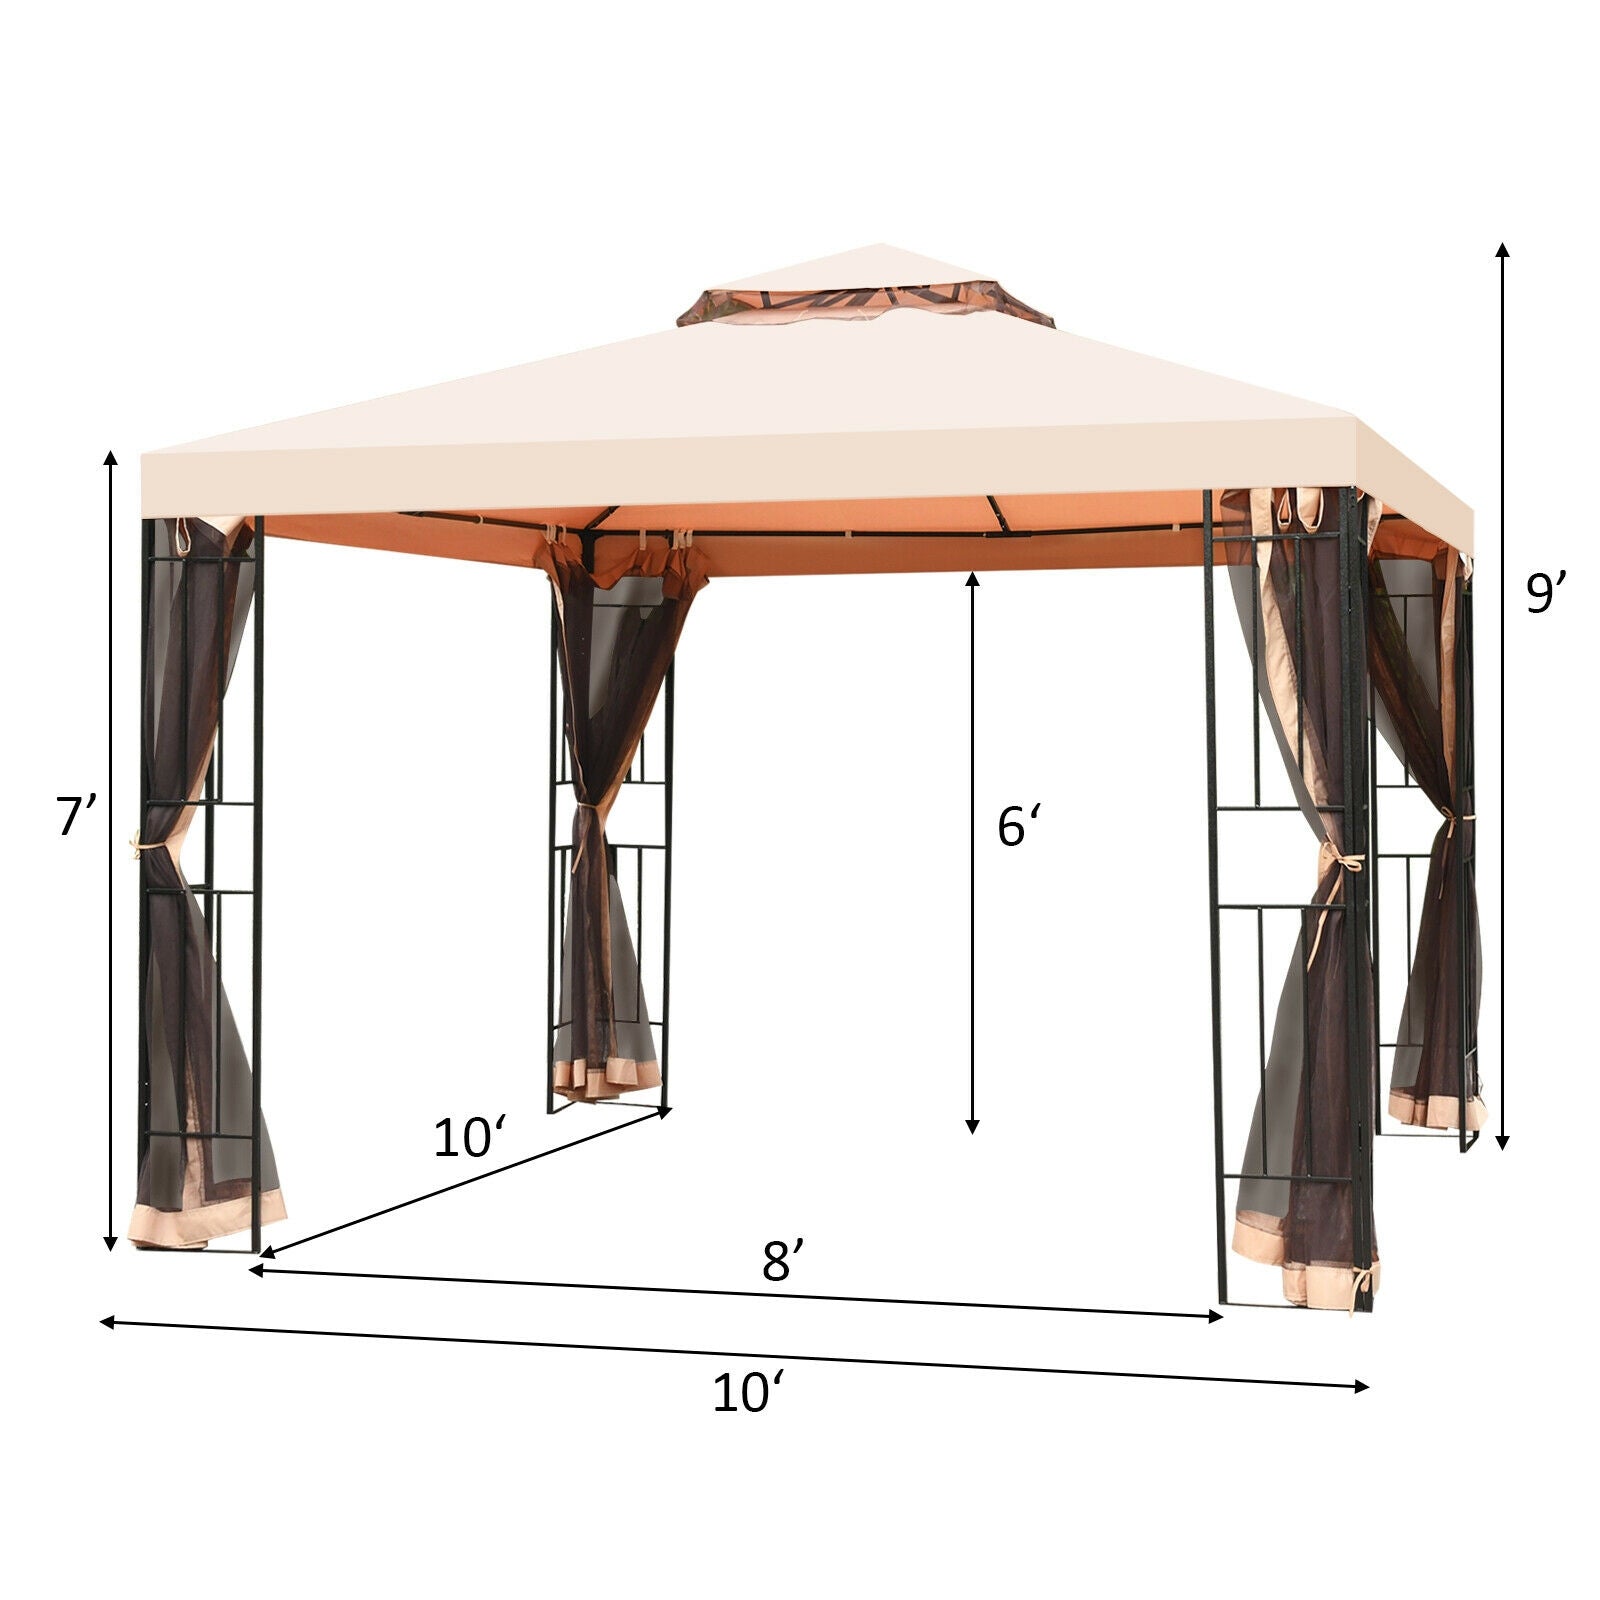 10 x 10 ft 2-Tier Vented Metal Gazebo Canopy with Mosquito Netting